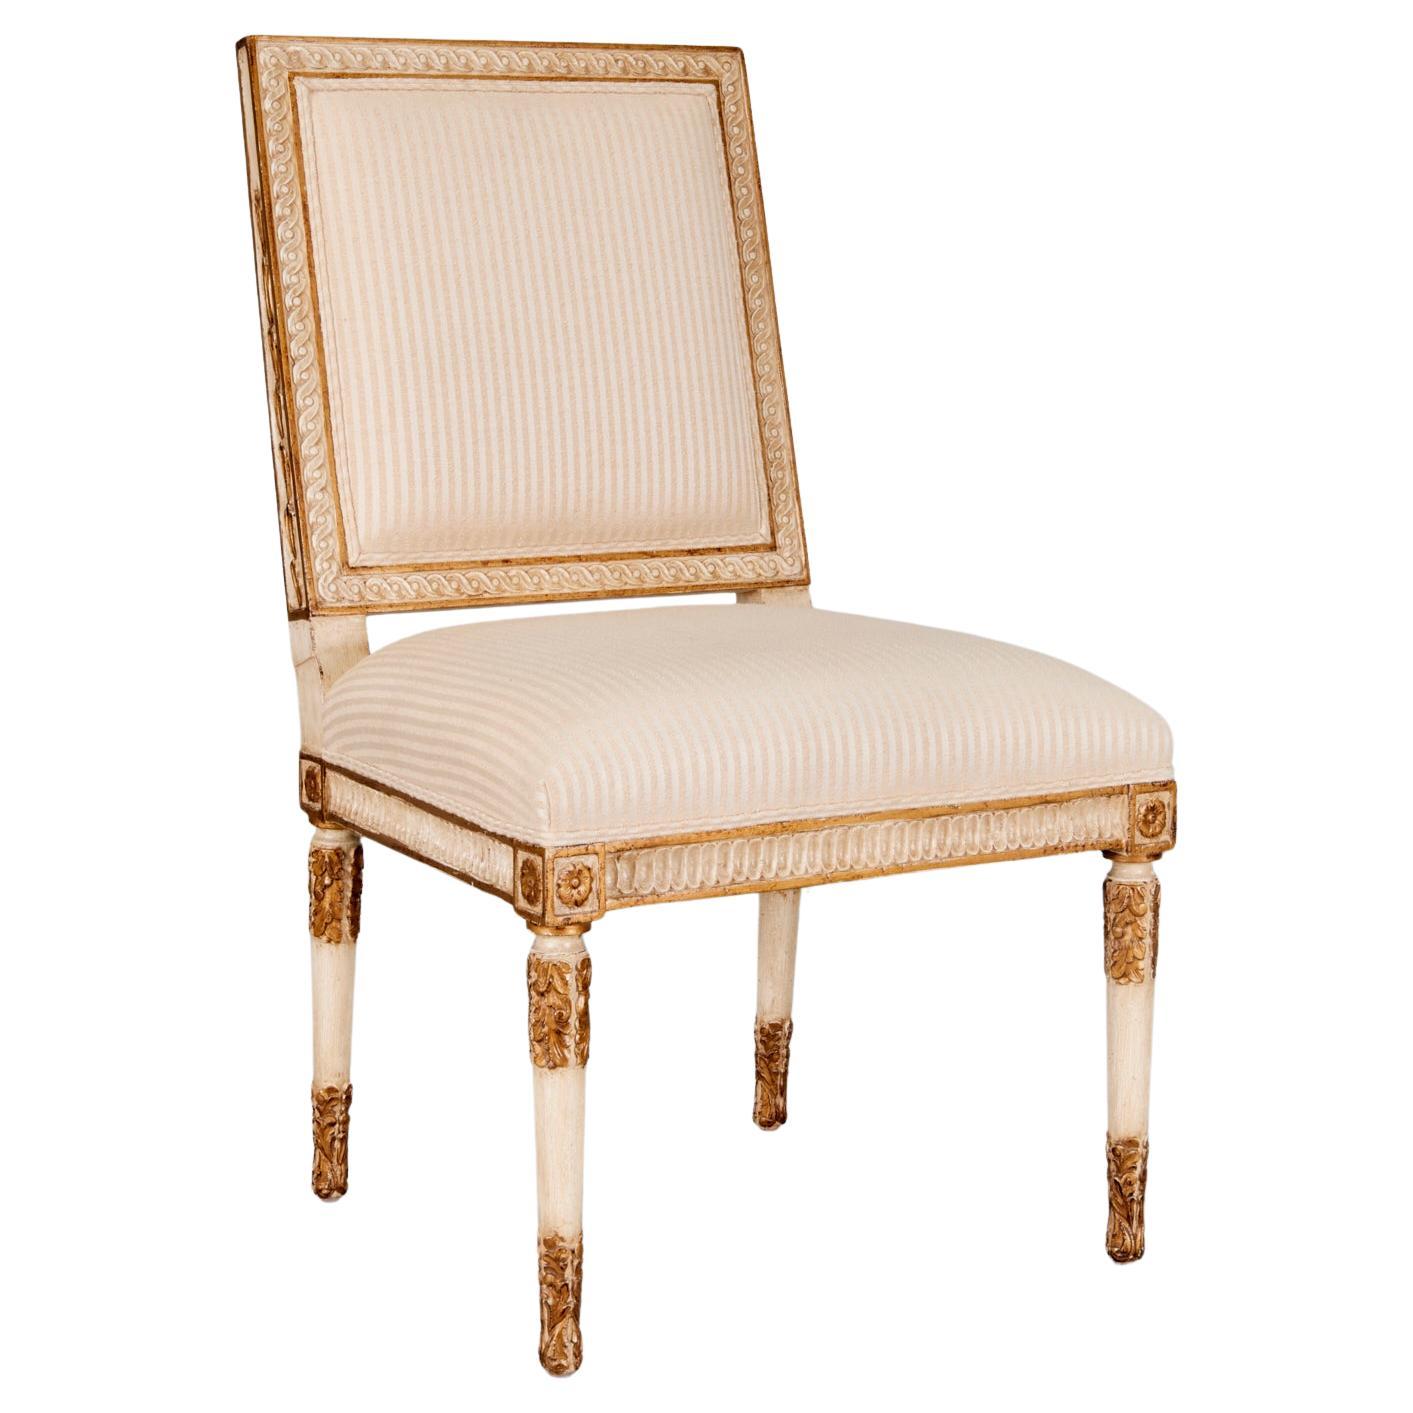 Italian Neoclassical Style Slipper Chair with Cream and Gold Painted Accents For Sale